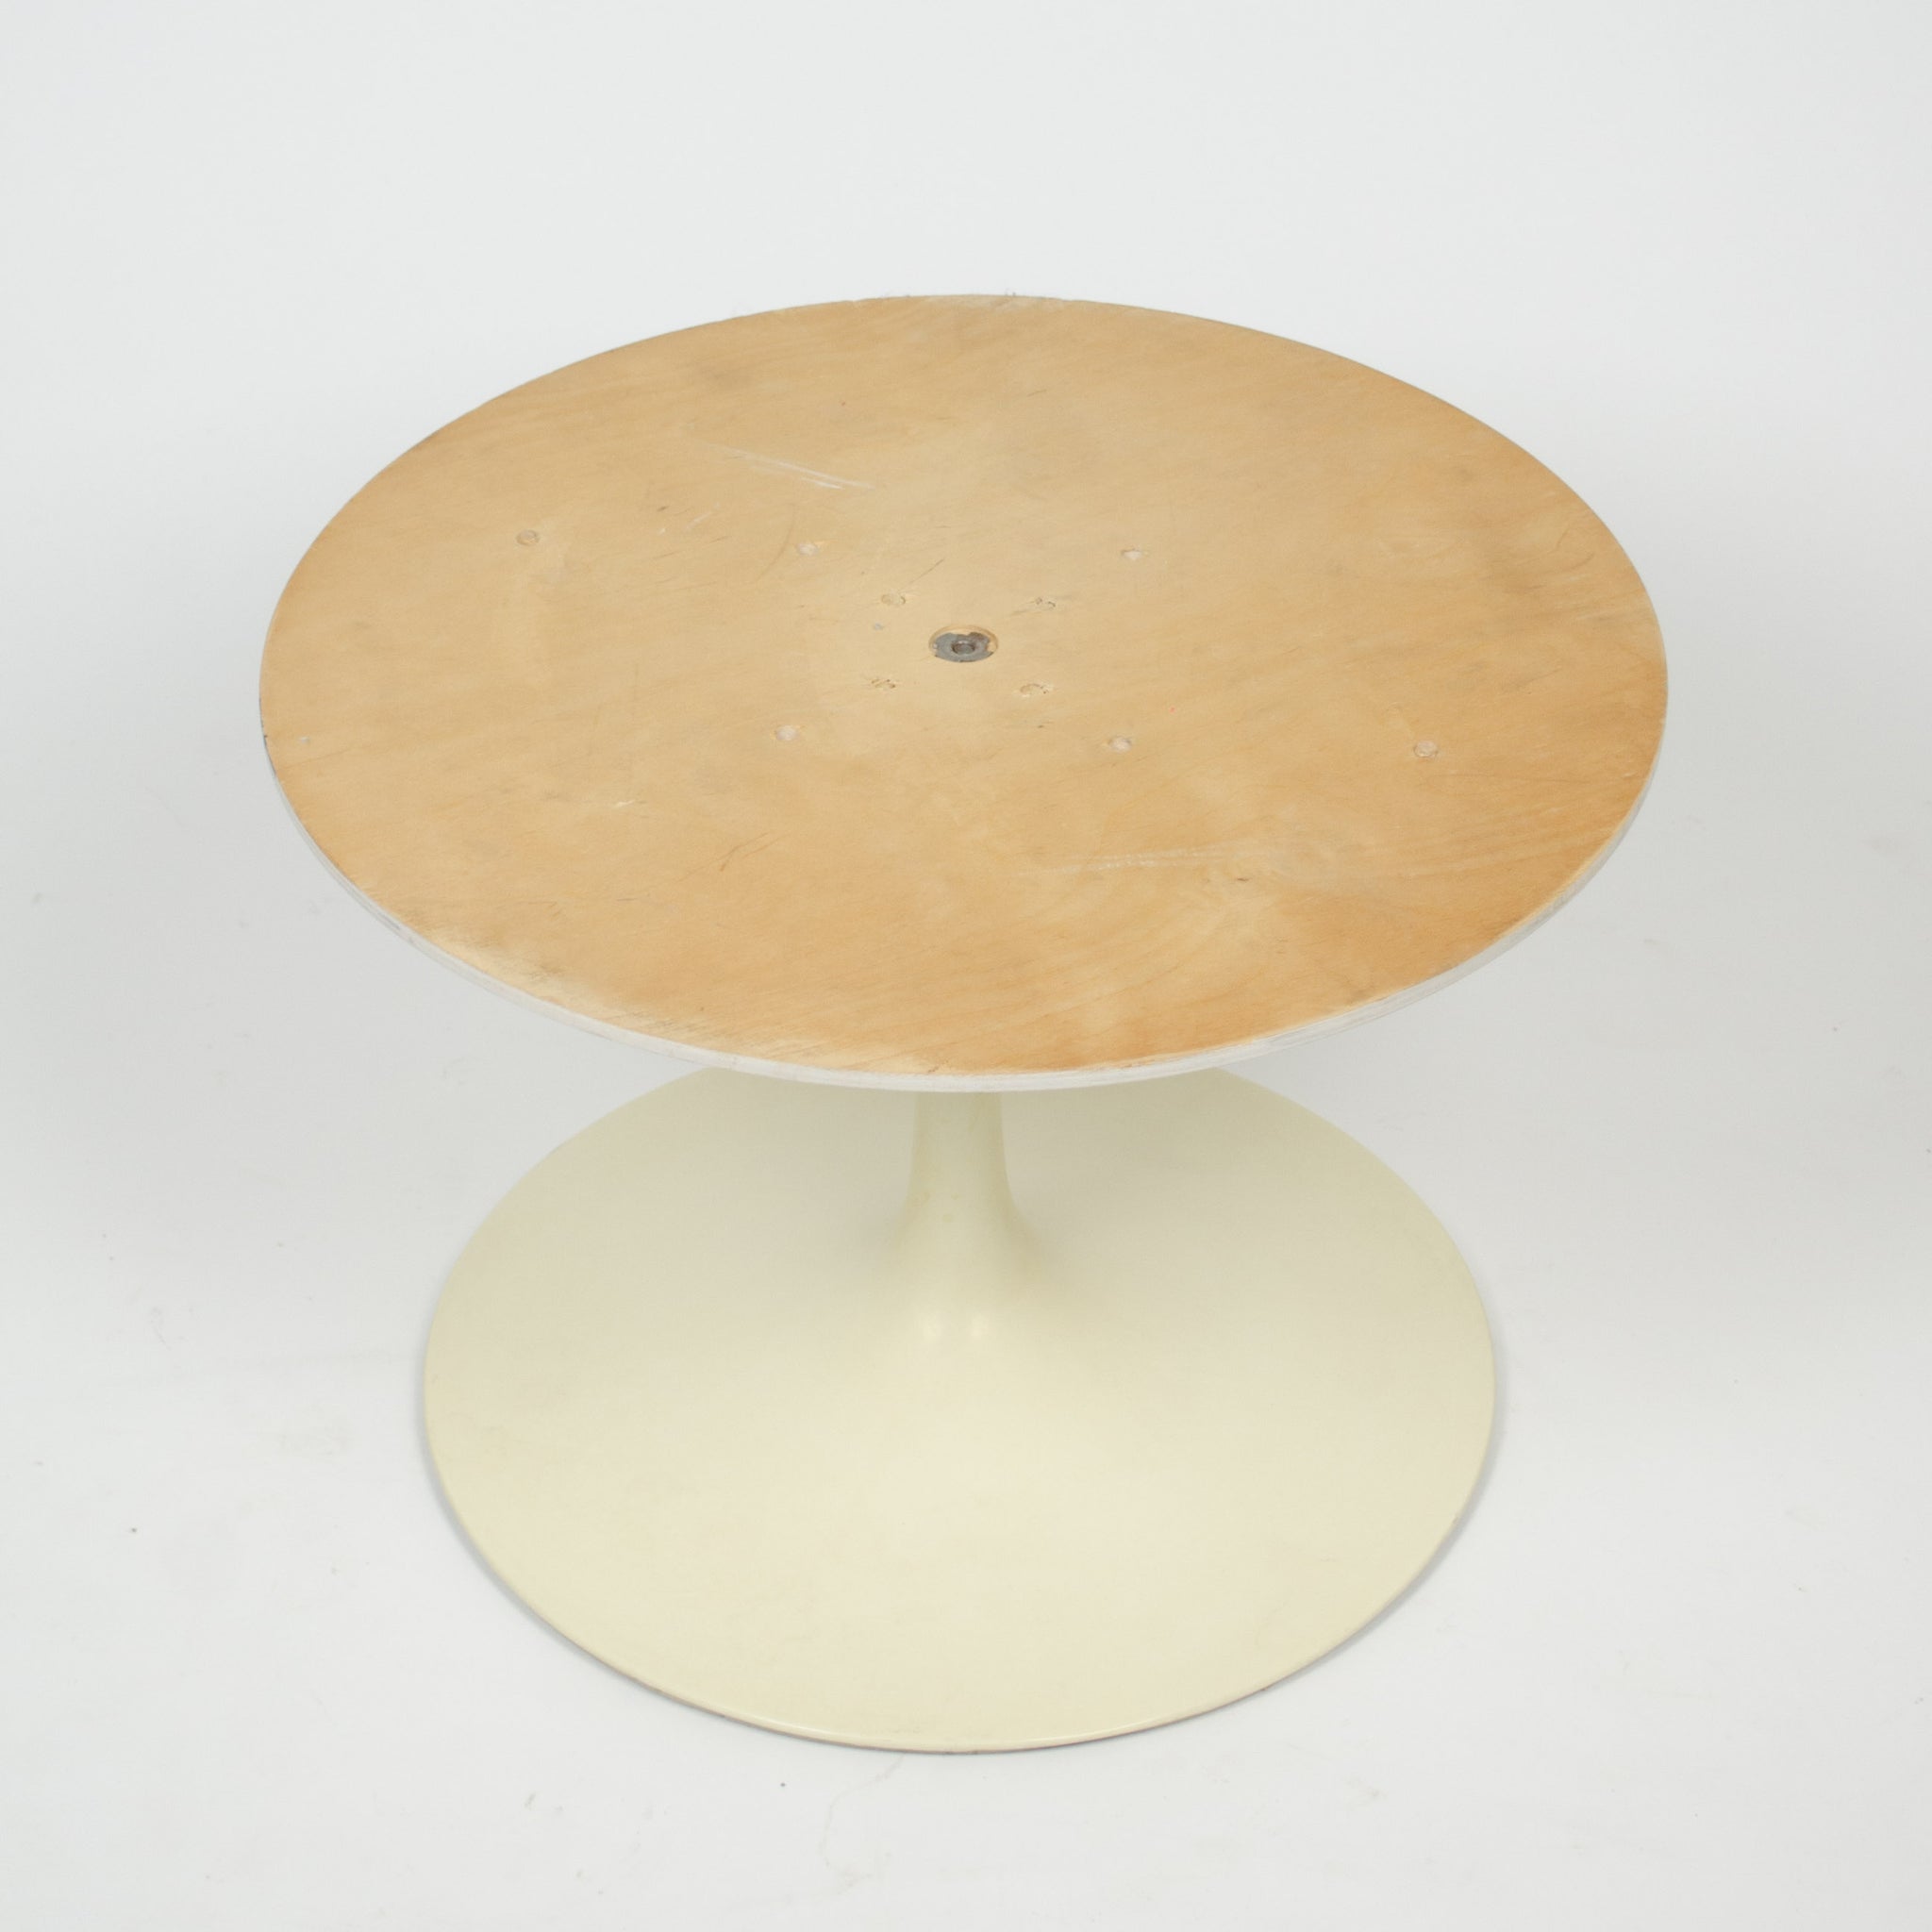 SOLD Eero Saarinen For Knoll 36 Inch White Marble Tulip Coffee Table 1960's